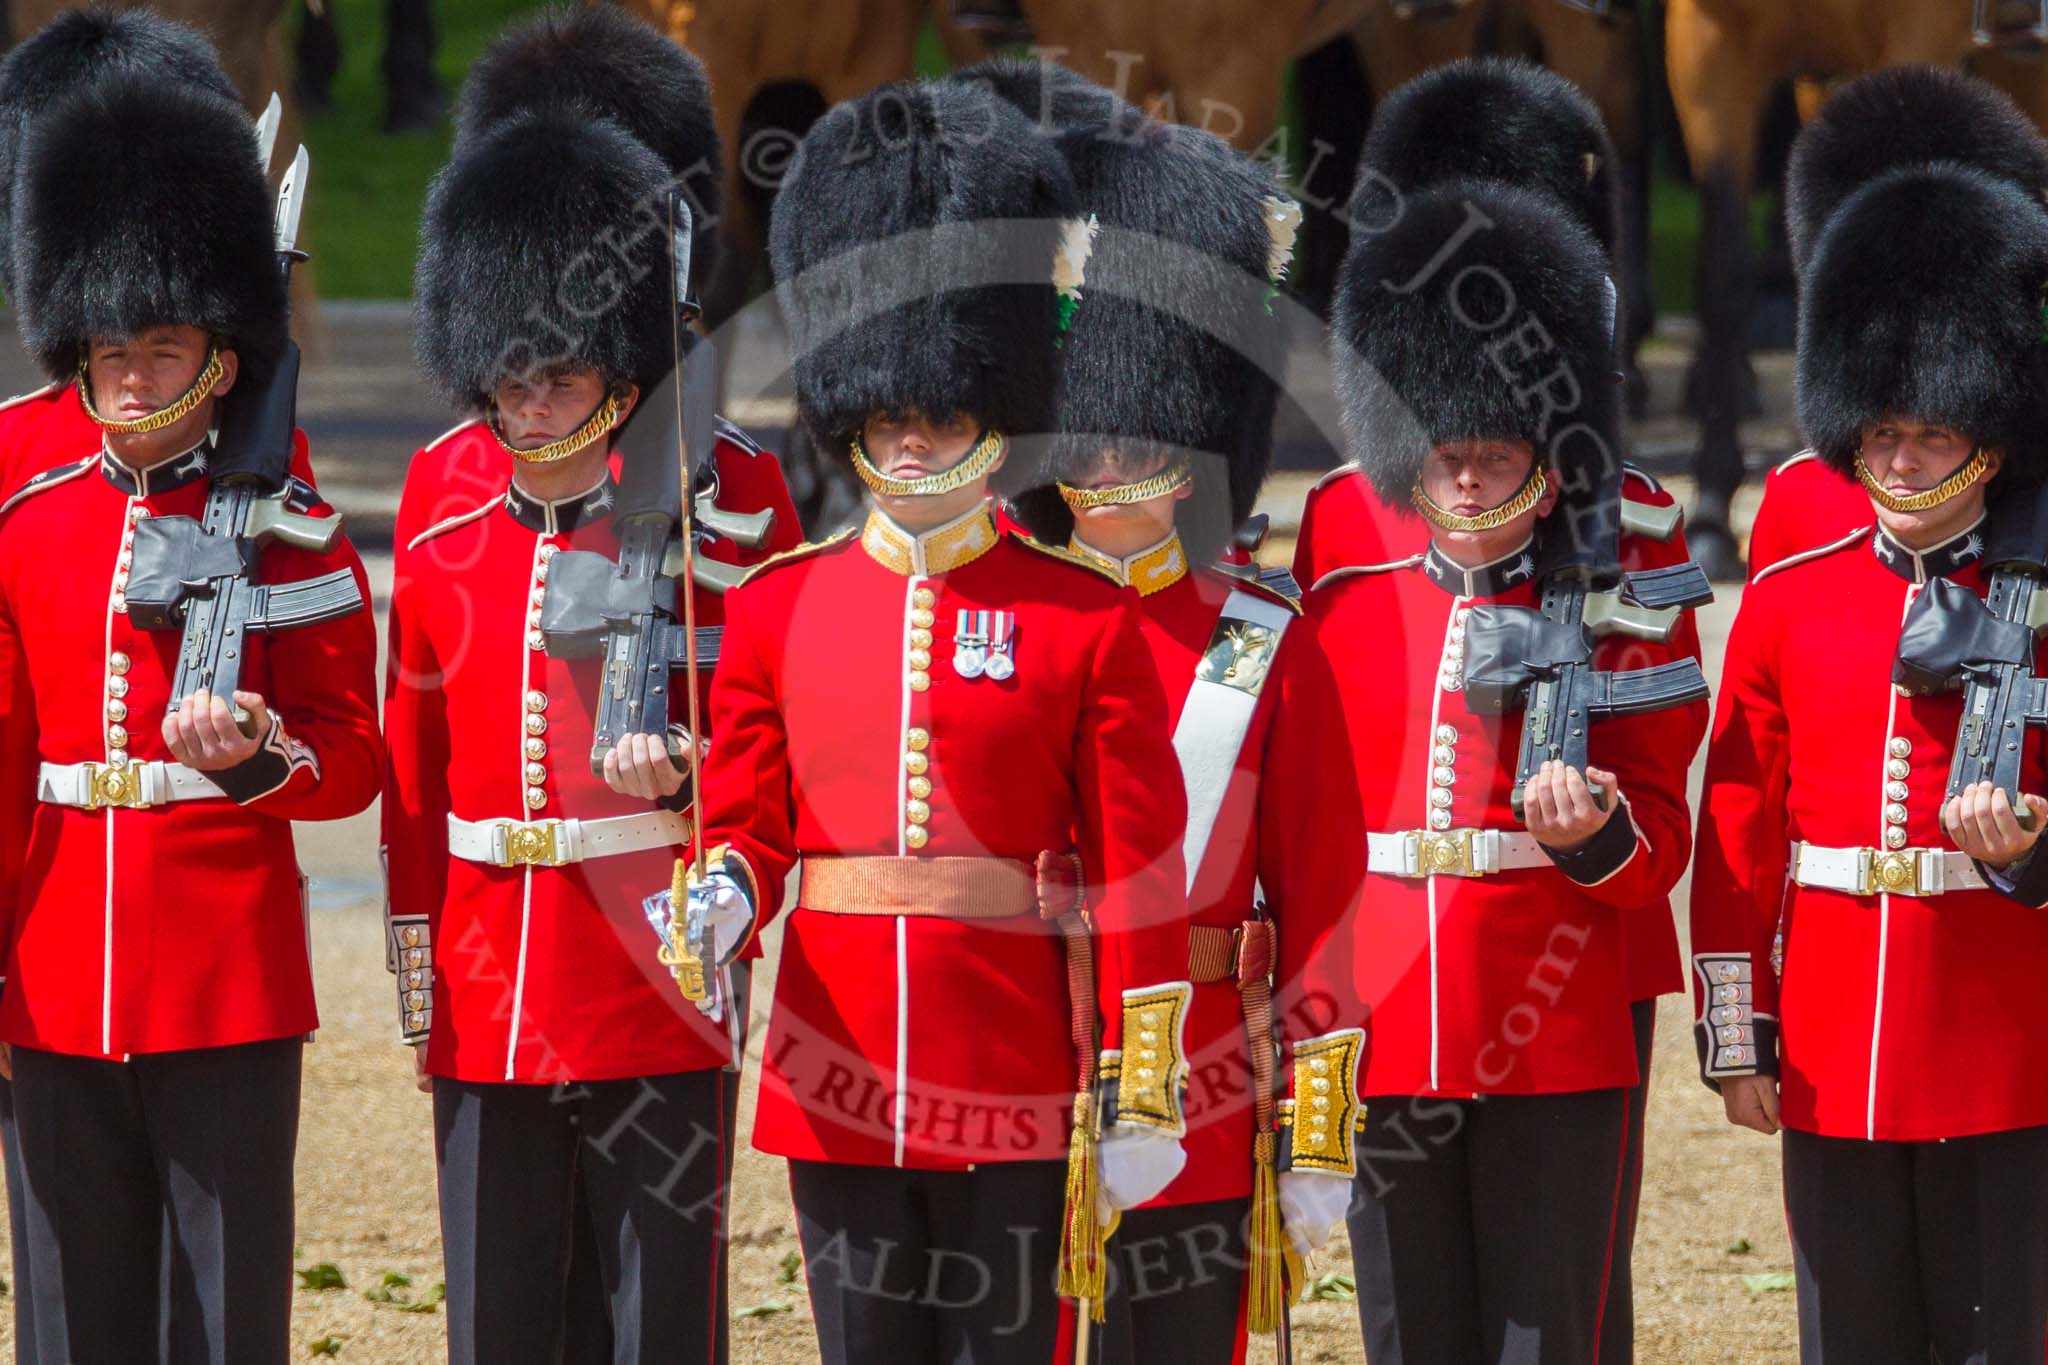 The Colonel's Review 2015.
Horse Guards Parade, Westminster,
London,

United Kingdom,
on 06 June 2015 at 11:15, image #288